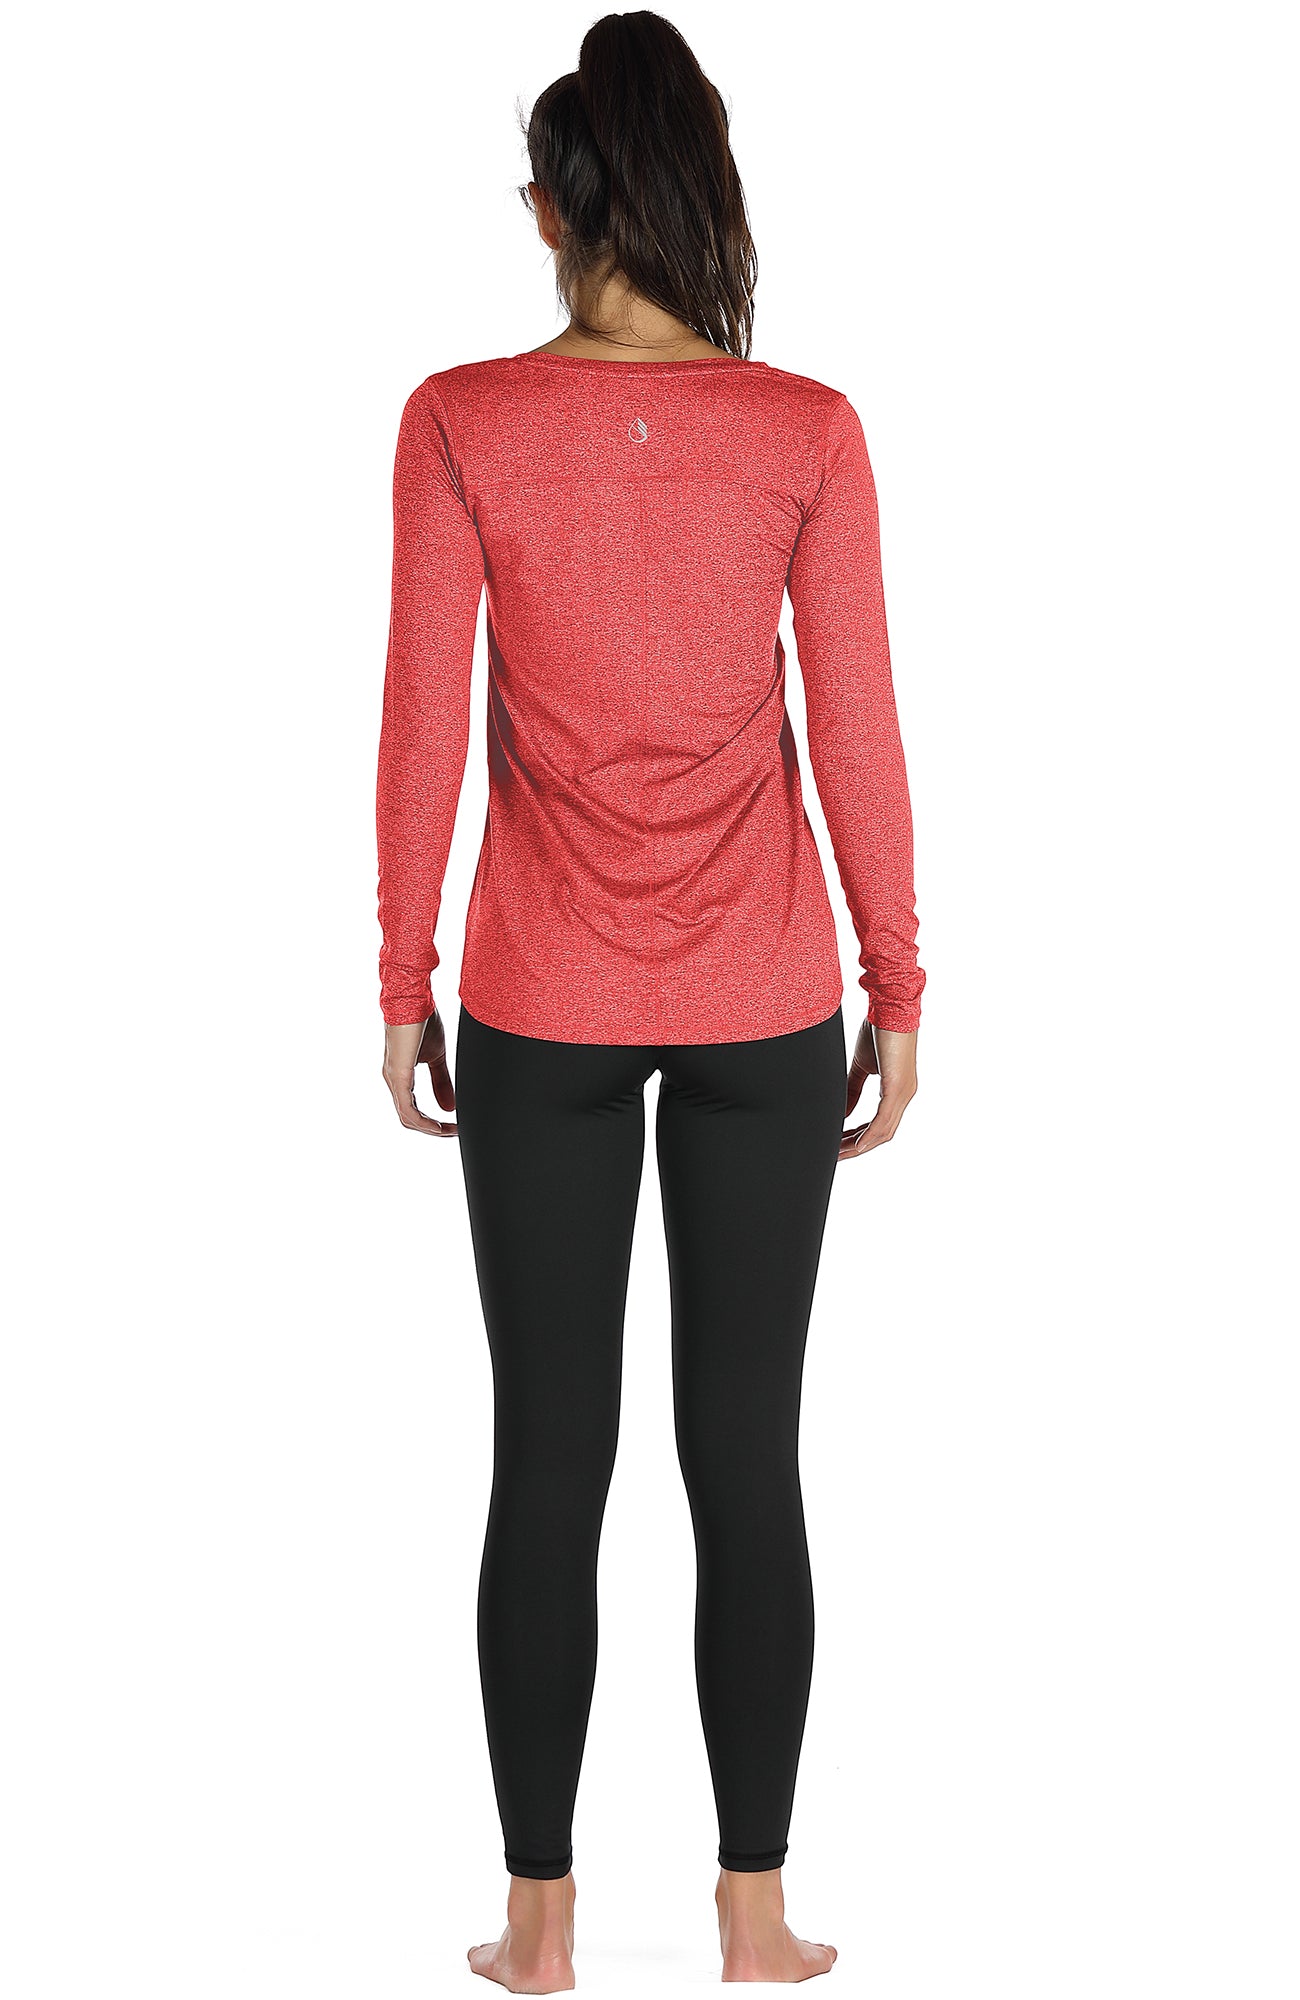 Women Long Sleeve Petite Yoga Shirts Mesh Splicing Moisture Wicking Workout  Running Tops/Underscrub Tee with Thumb Hole : : Clothing, Shoes 